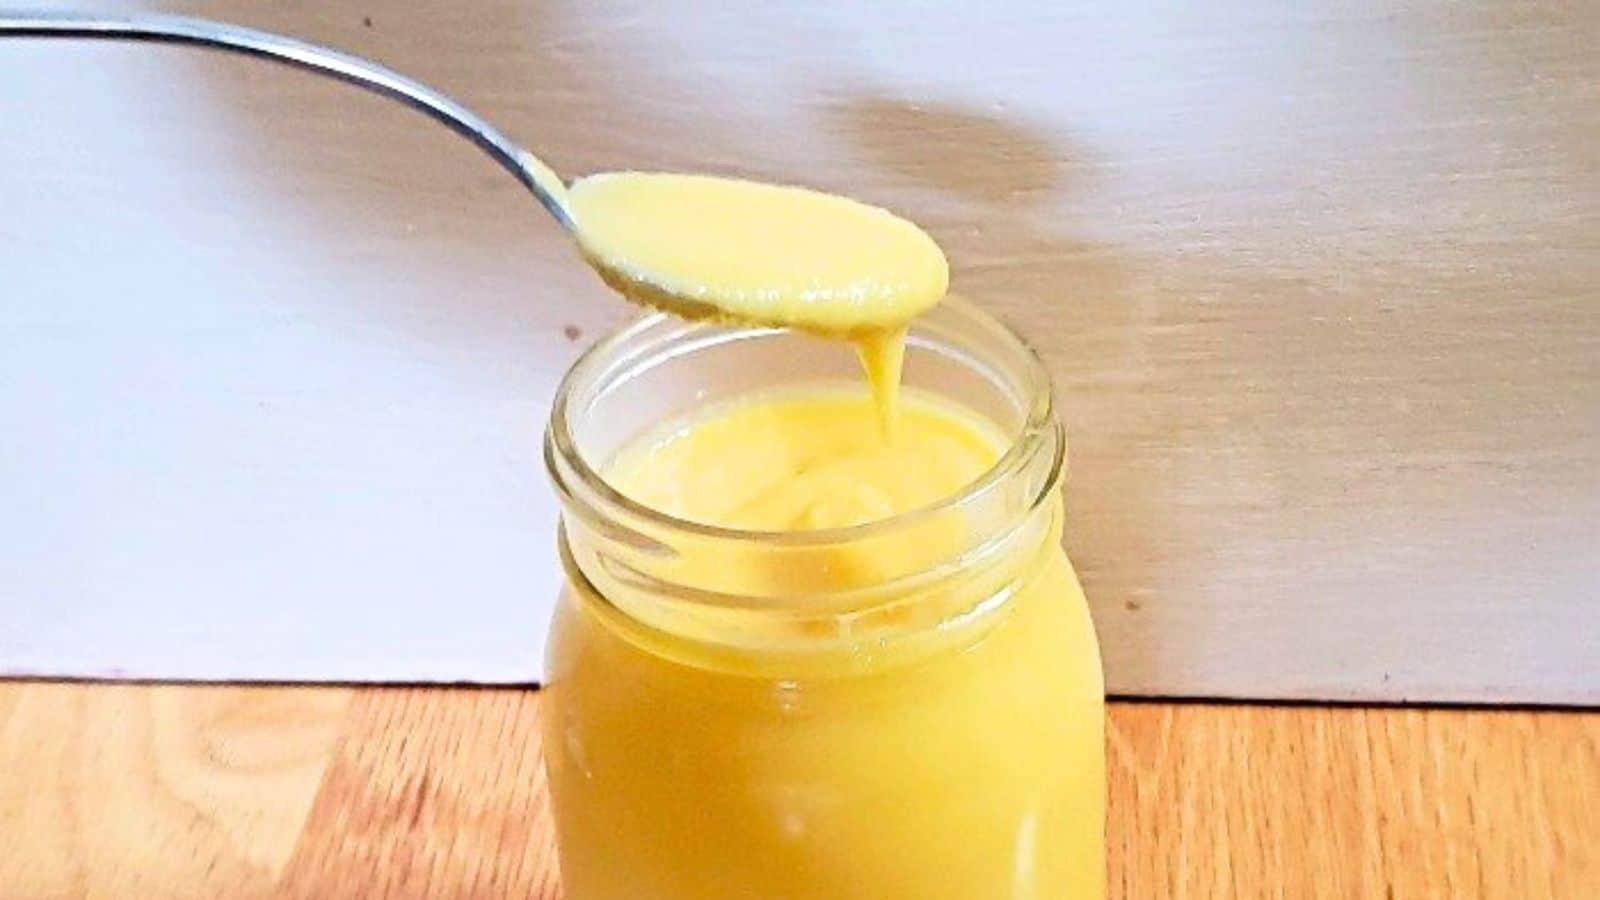 A front on photo shows mango curd in a glass jar with a spoon that has removed some curd.